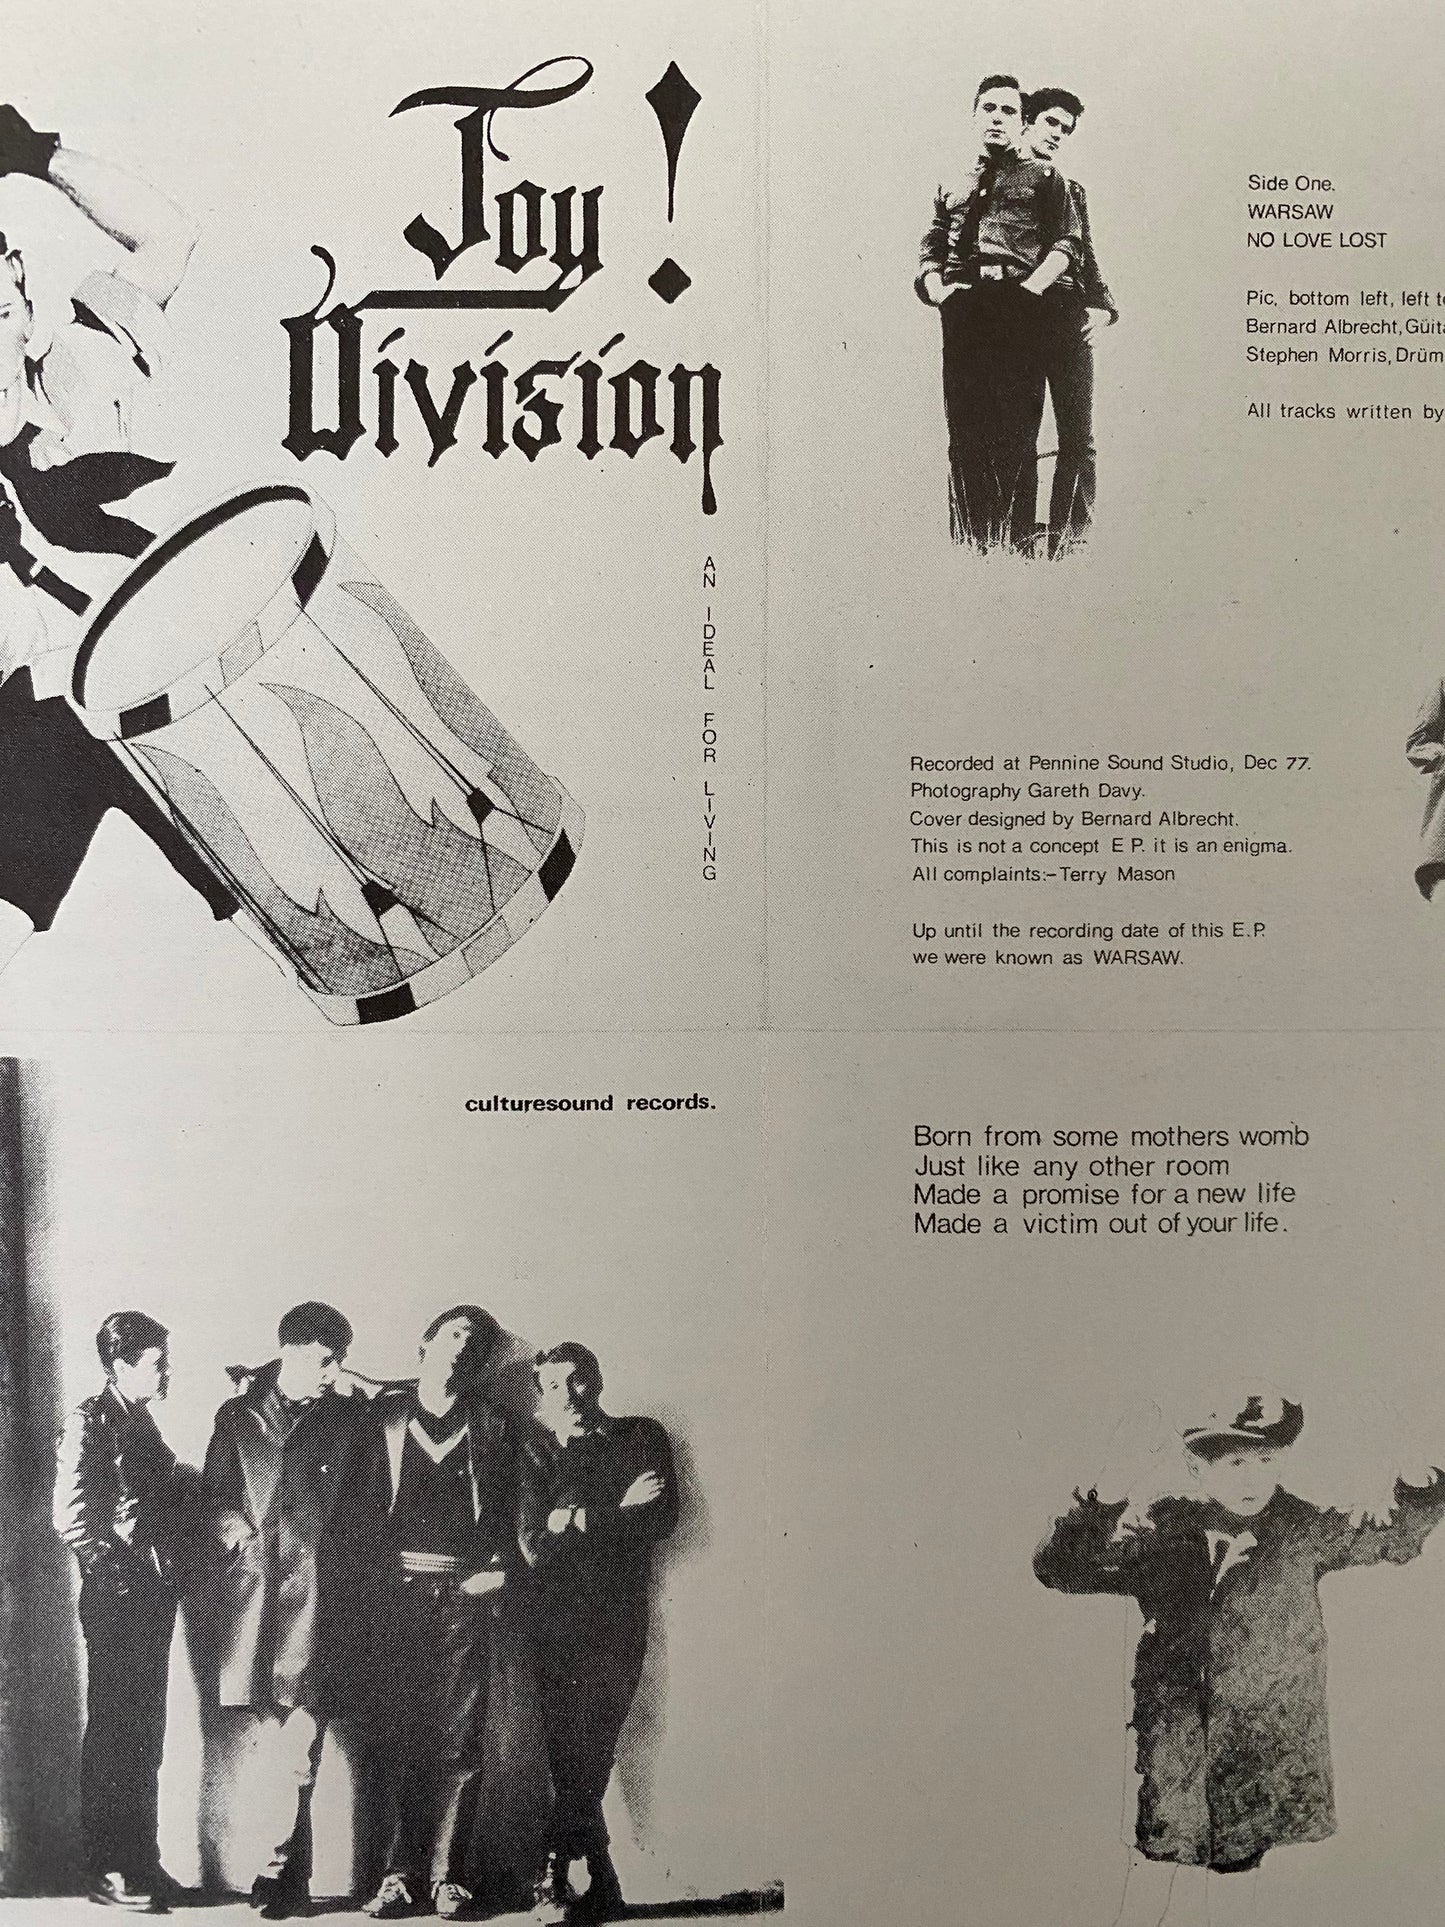 An Ideal For Living: An History Of Joy Divison (1984)